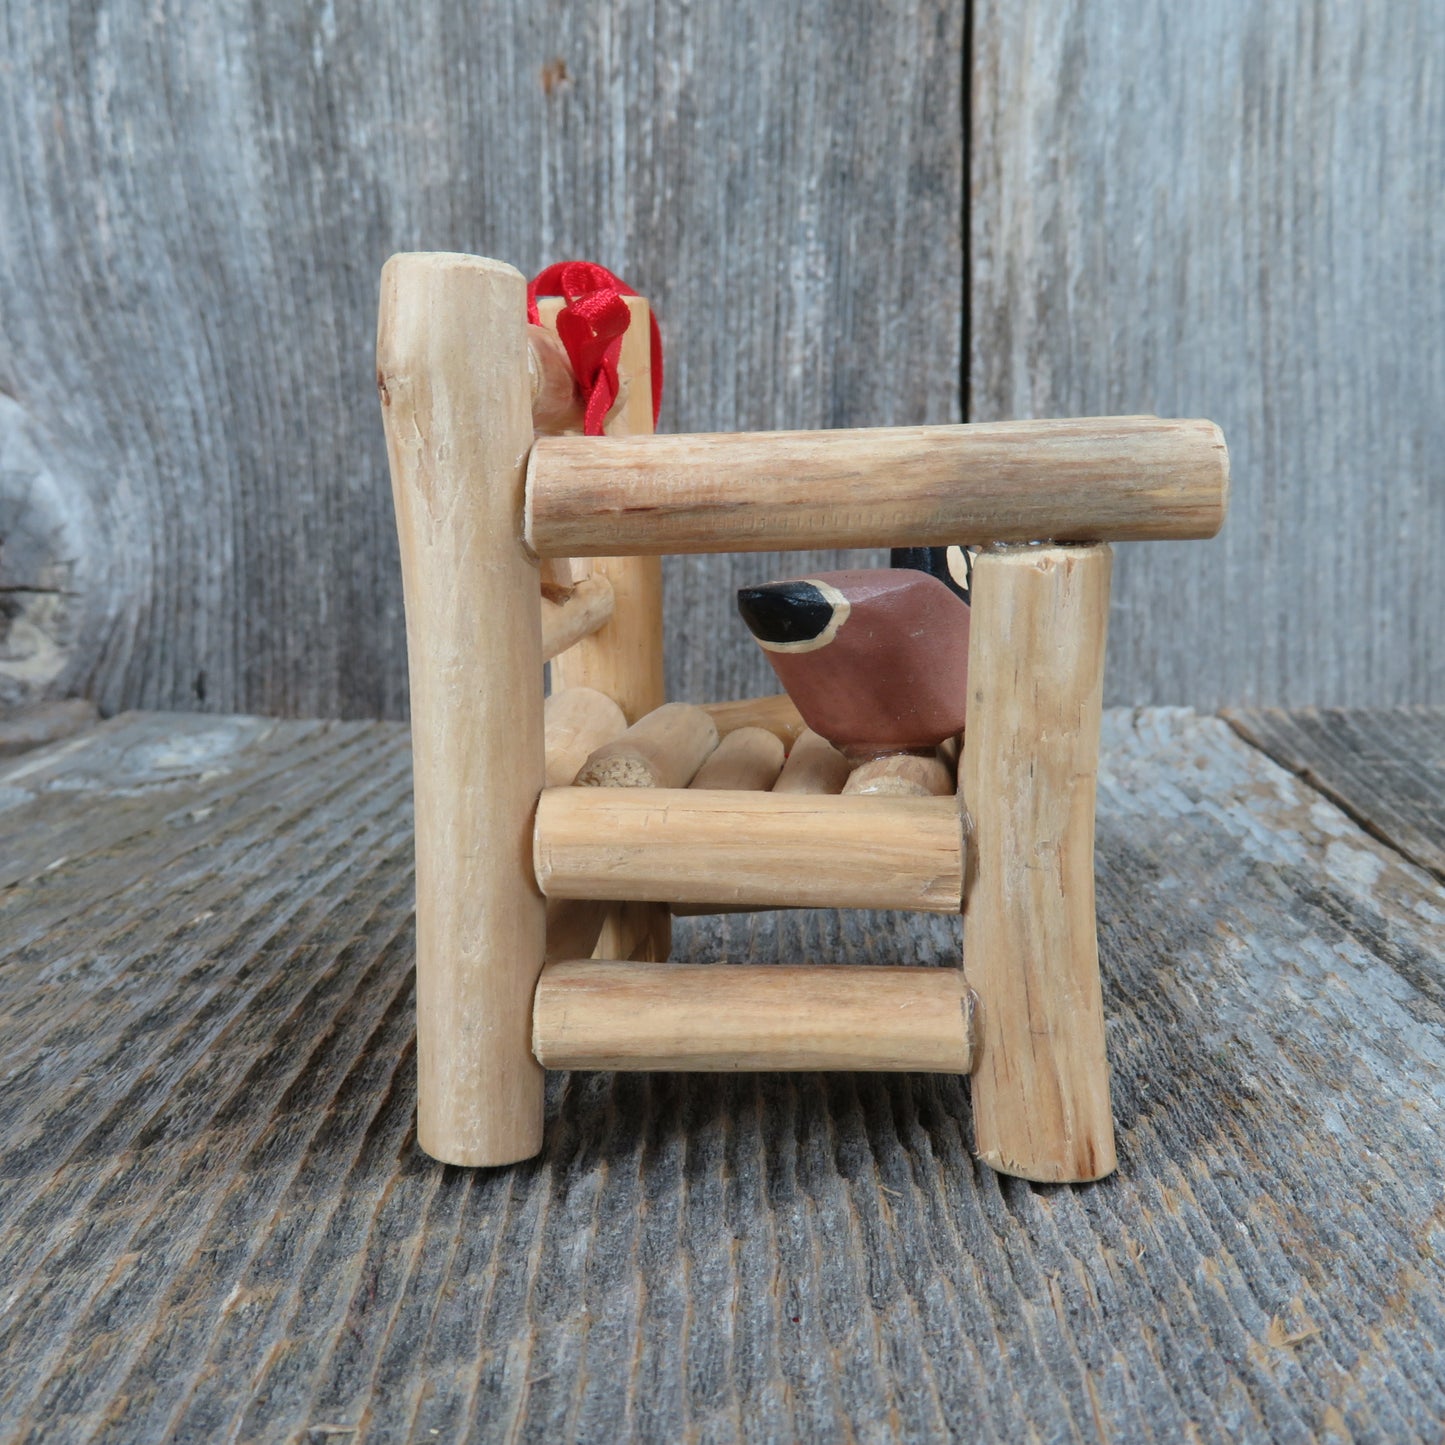 Rough Hewn Log Chair Ornament Wood Duck Wooden Rustic Cabin Christmas Midwest - At Grandma's Table